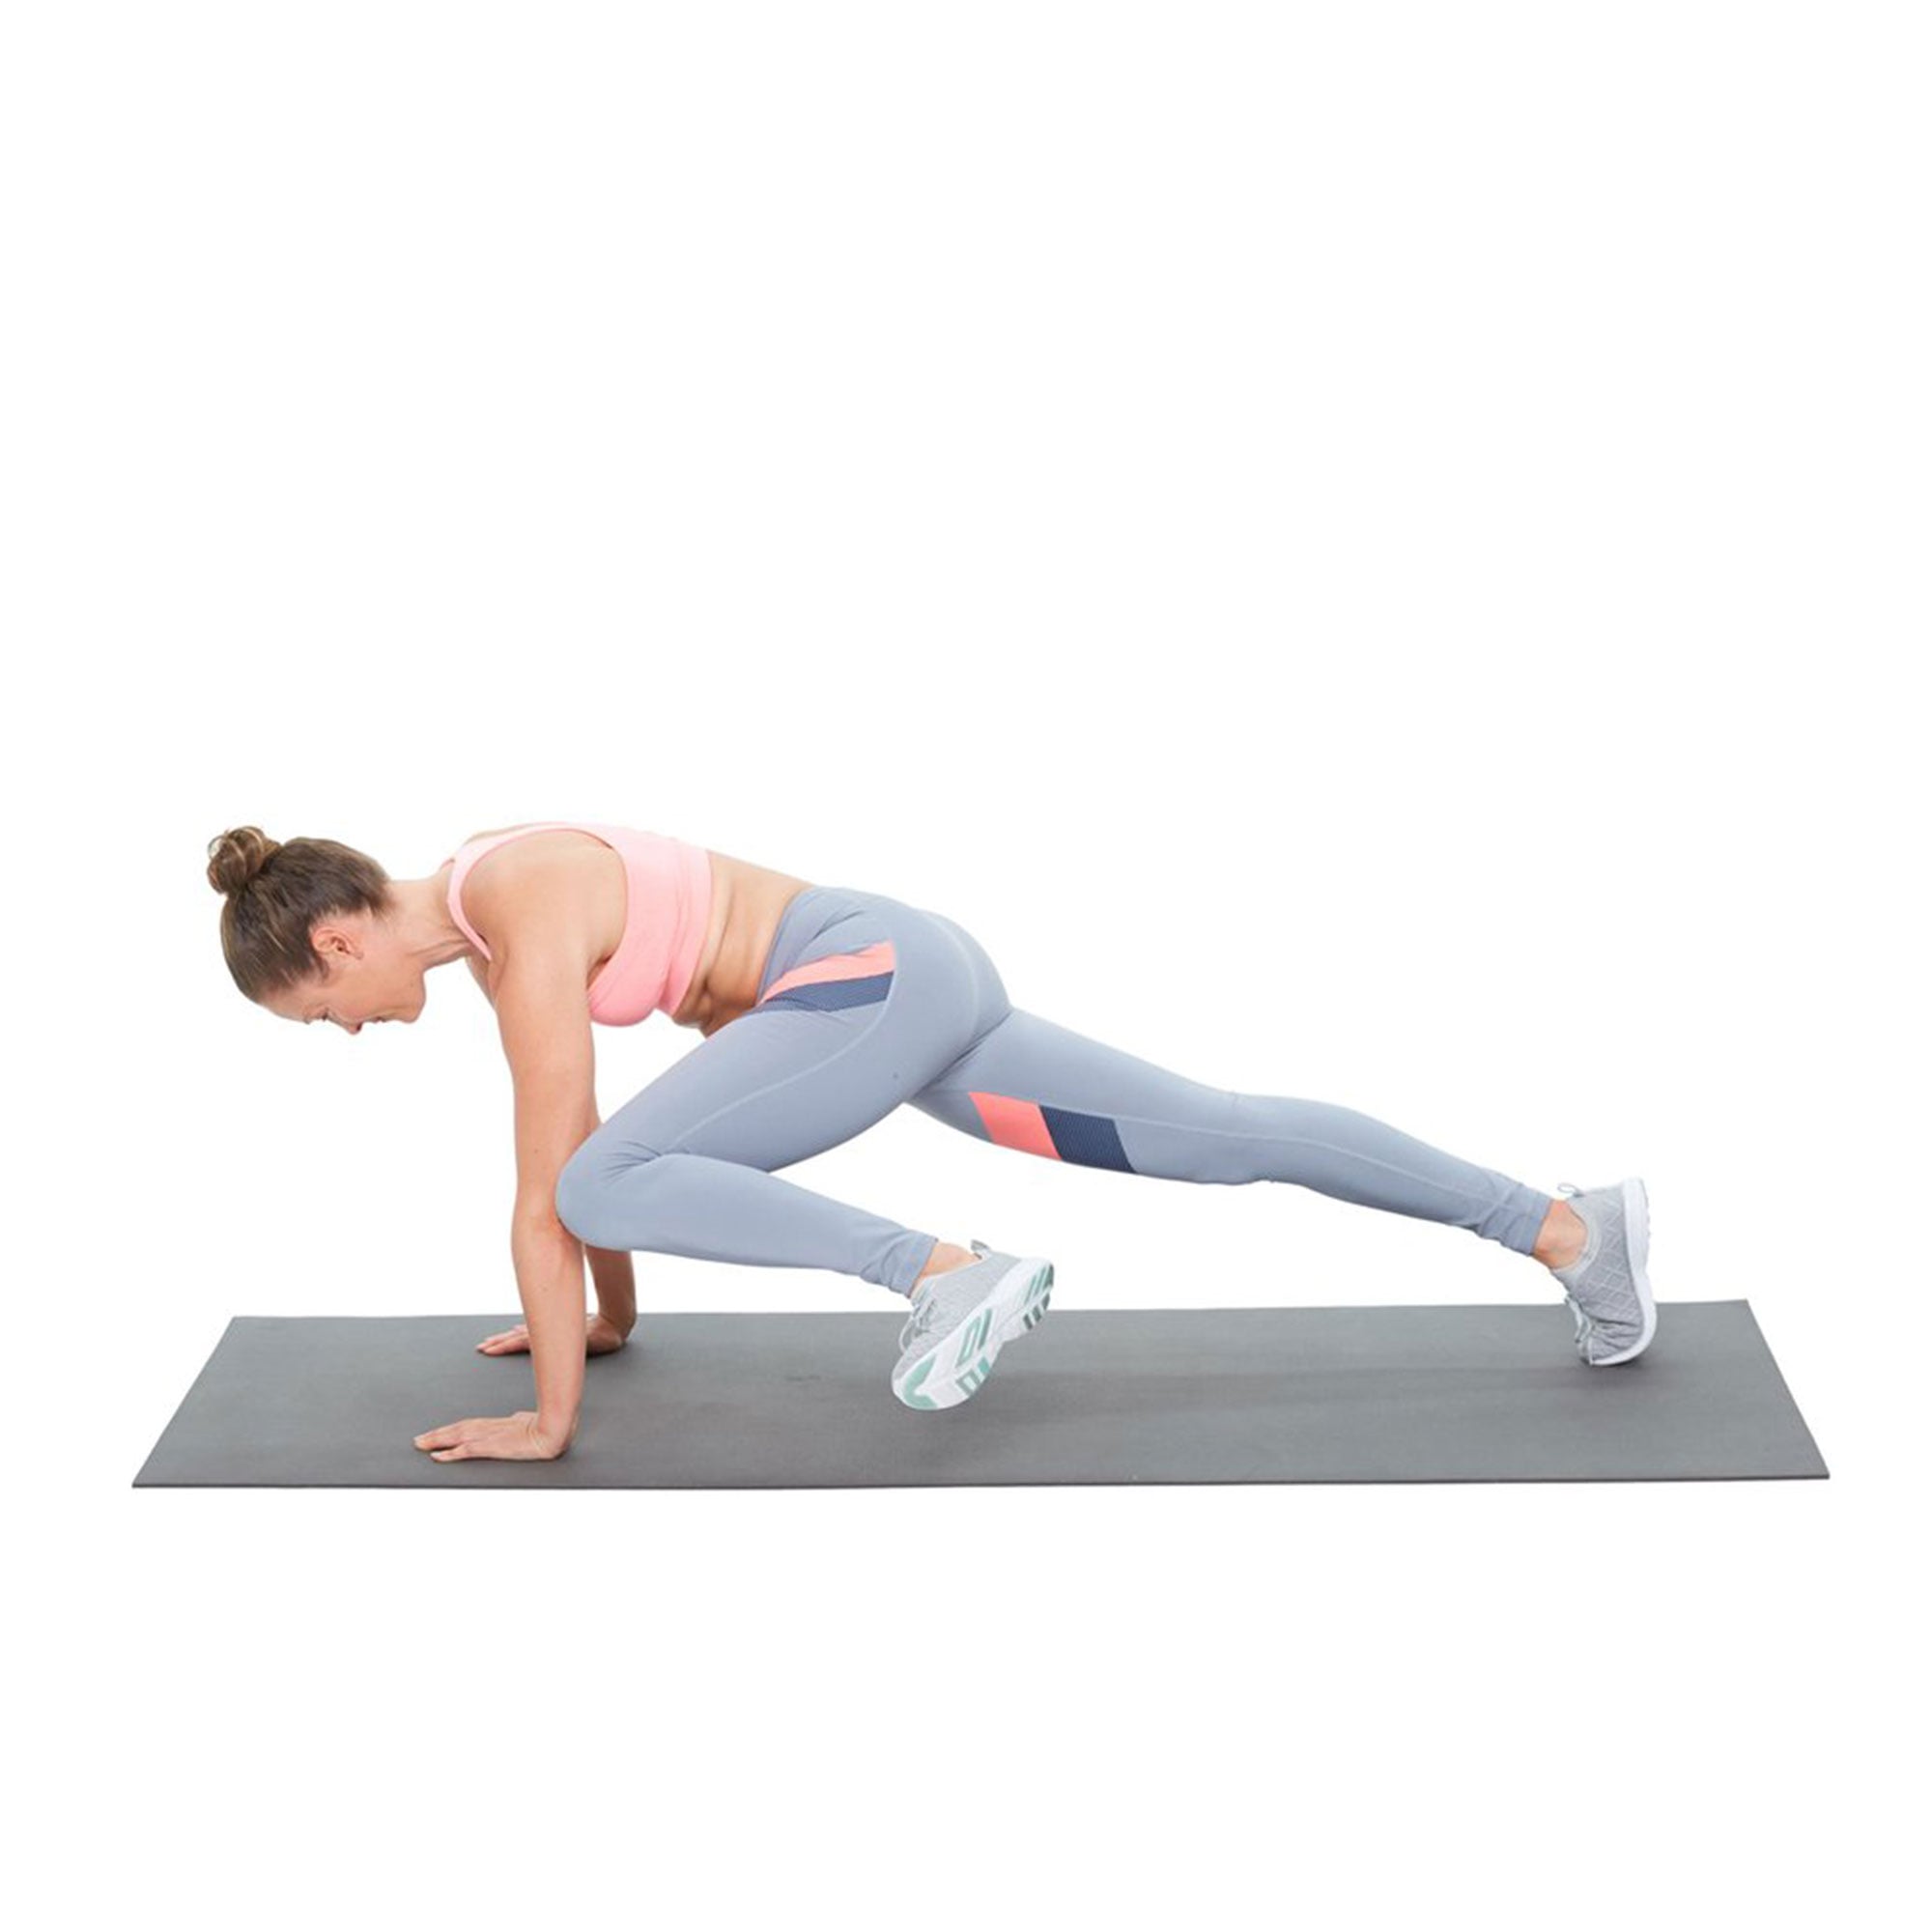 How To Do Hip Dip Planks In 60 Seconds, 60 Seconds To Fit